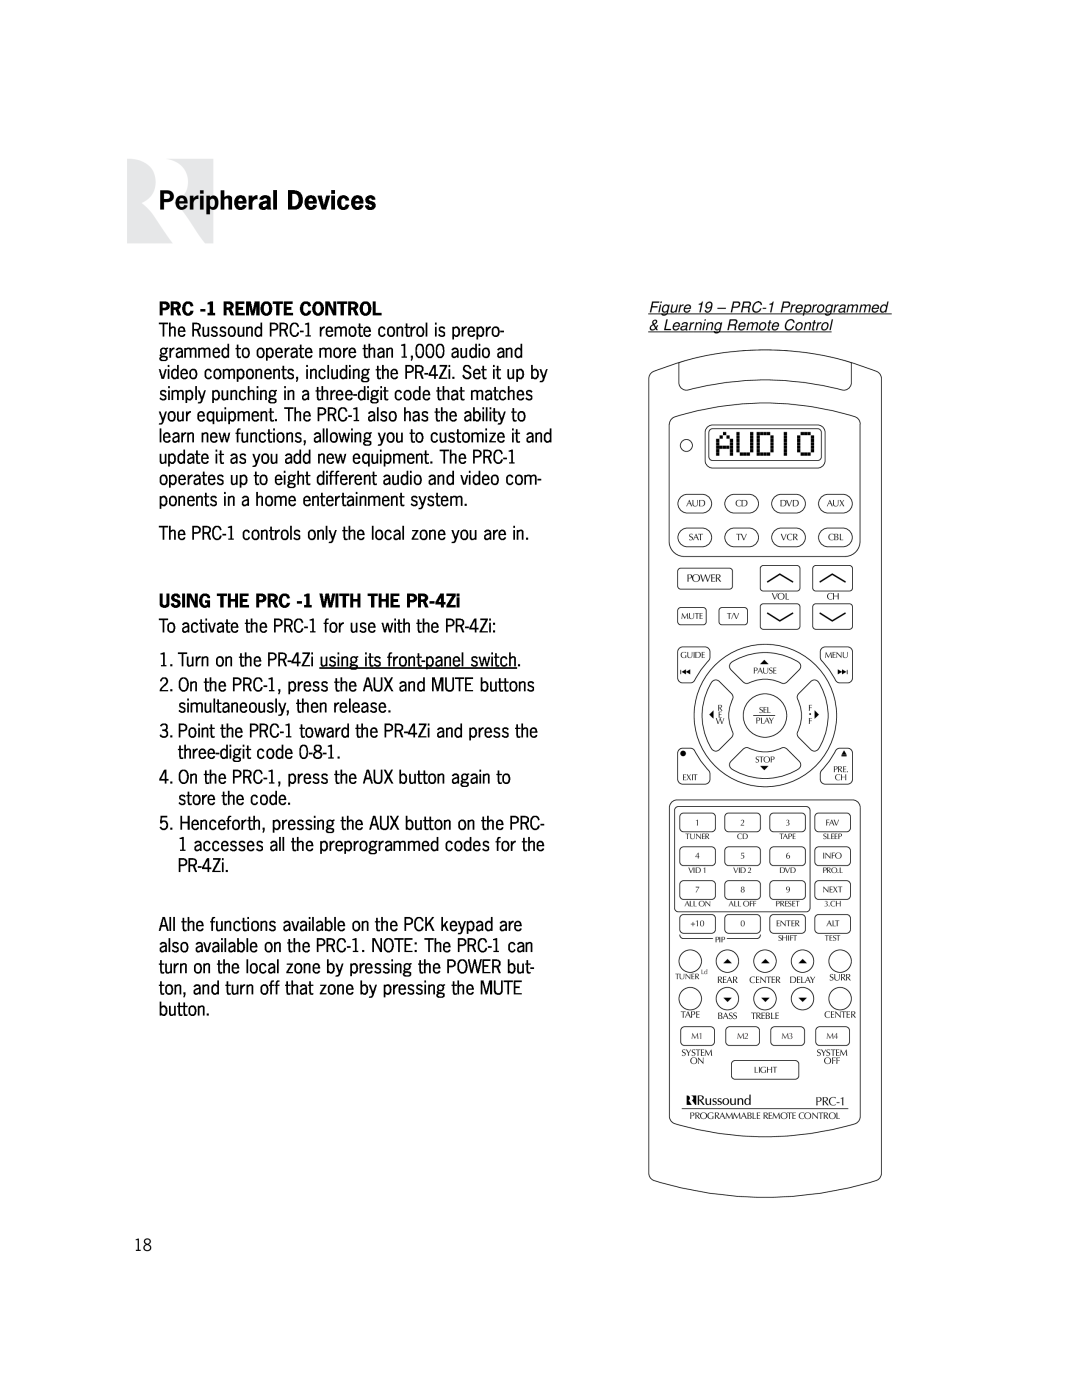 Russound instruction manual Peripheral Devices, PRC -1REMOTE CONTROL, USING THE PRC -1WITH THE PR-4Zi 